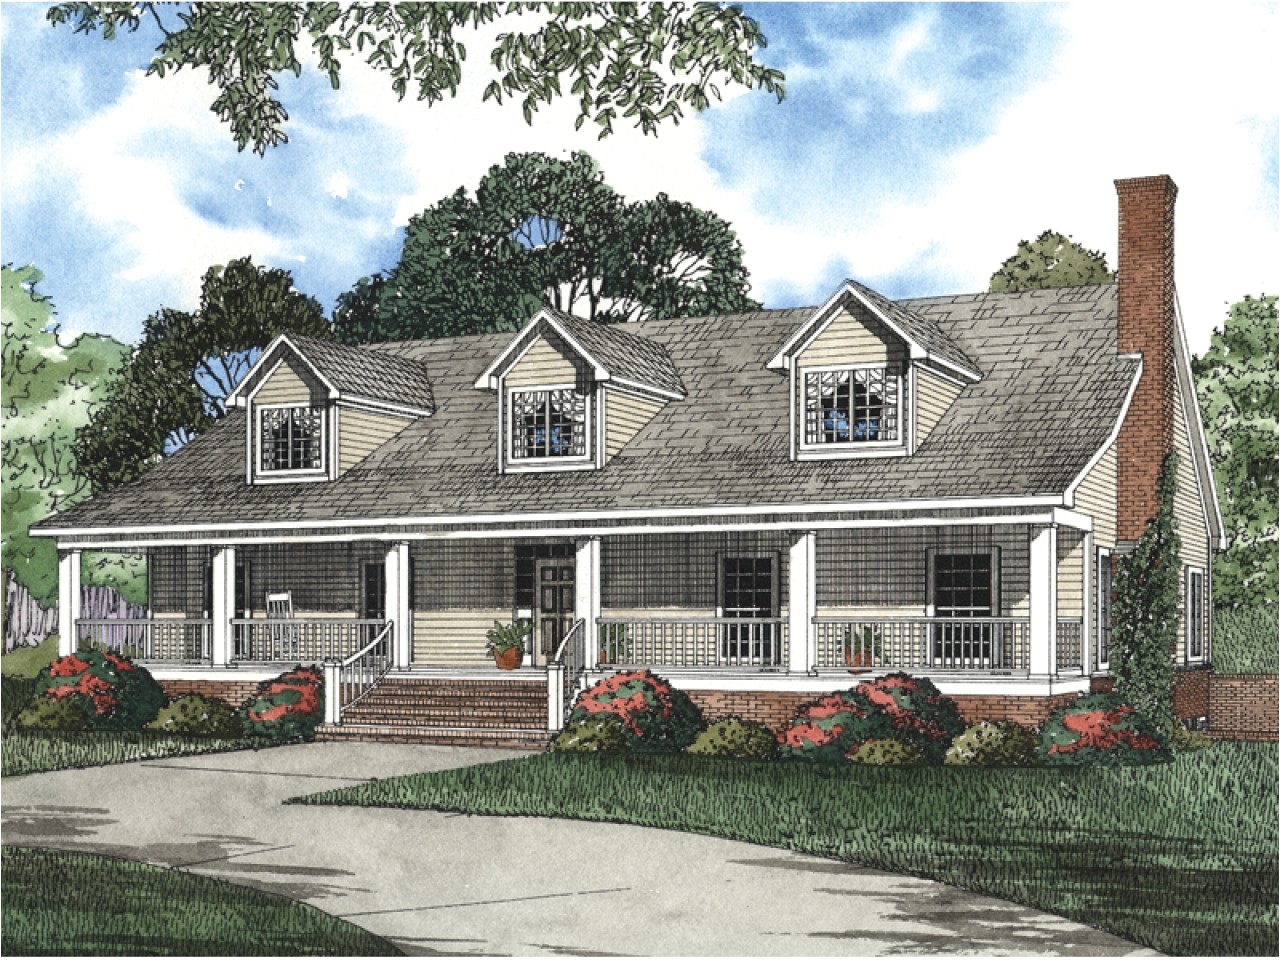 House Plans for Cape Cod Style Homes Cape Cod Style Screen Door Cape Cod Ranch Style House